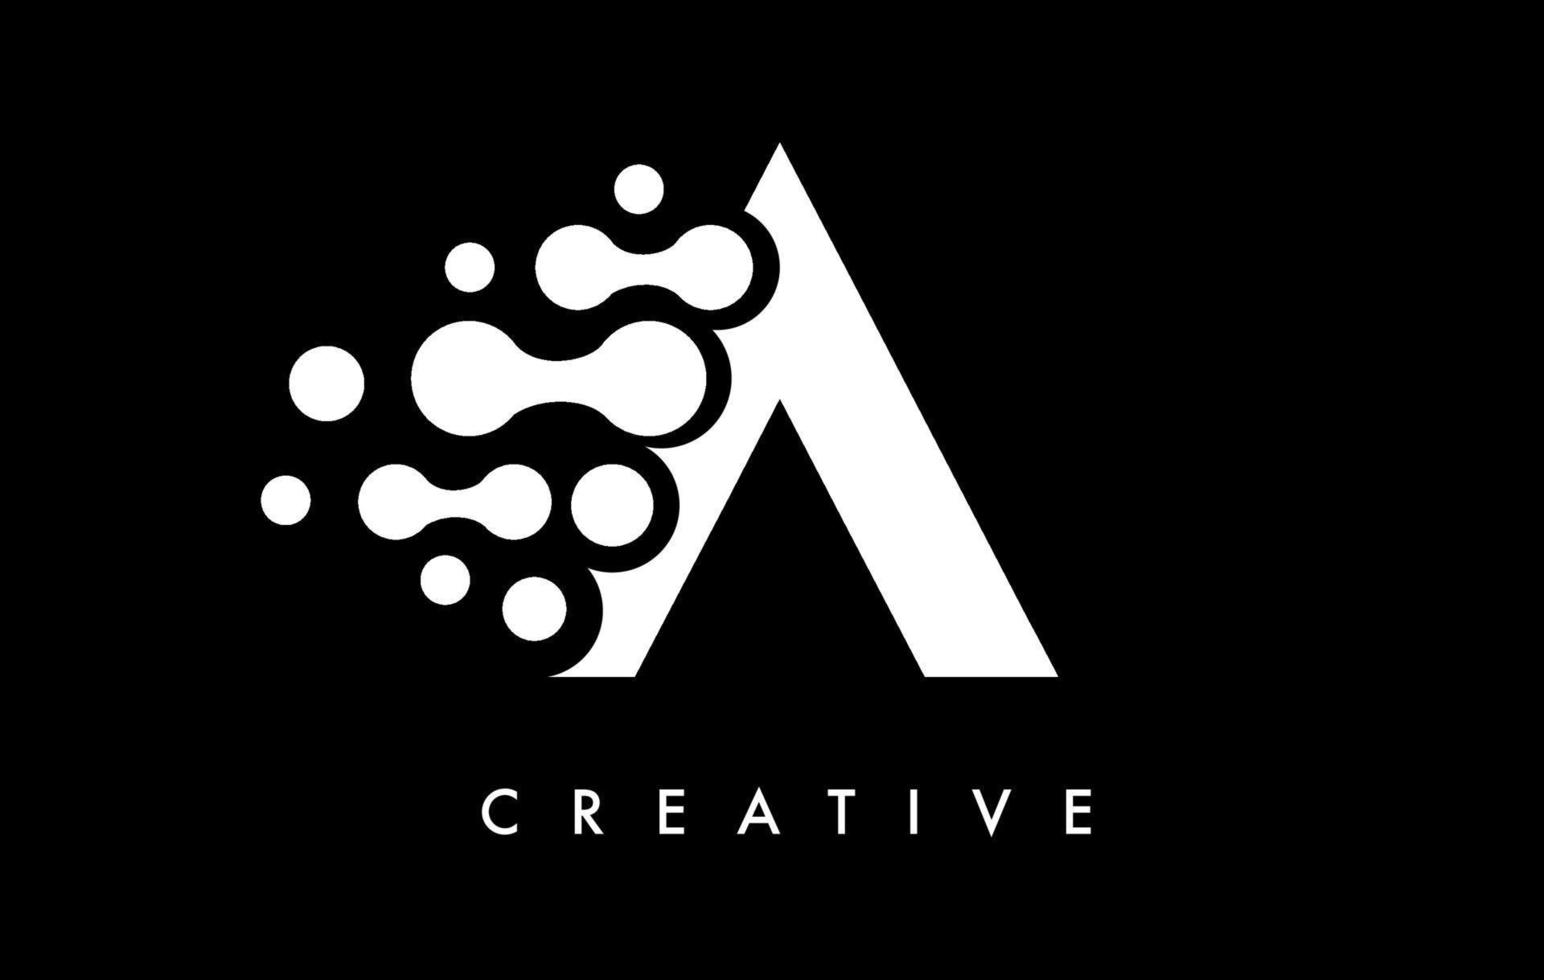 Letter A Dots Logo Design with Black and White Colors on Black Background Vector